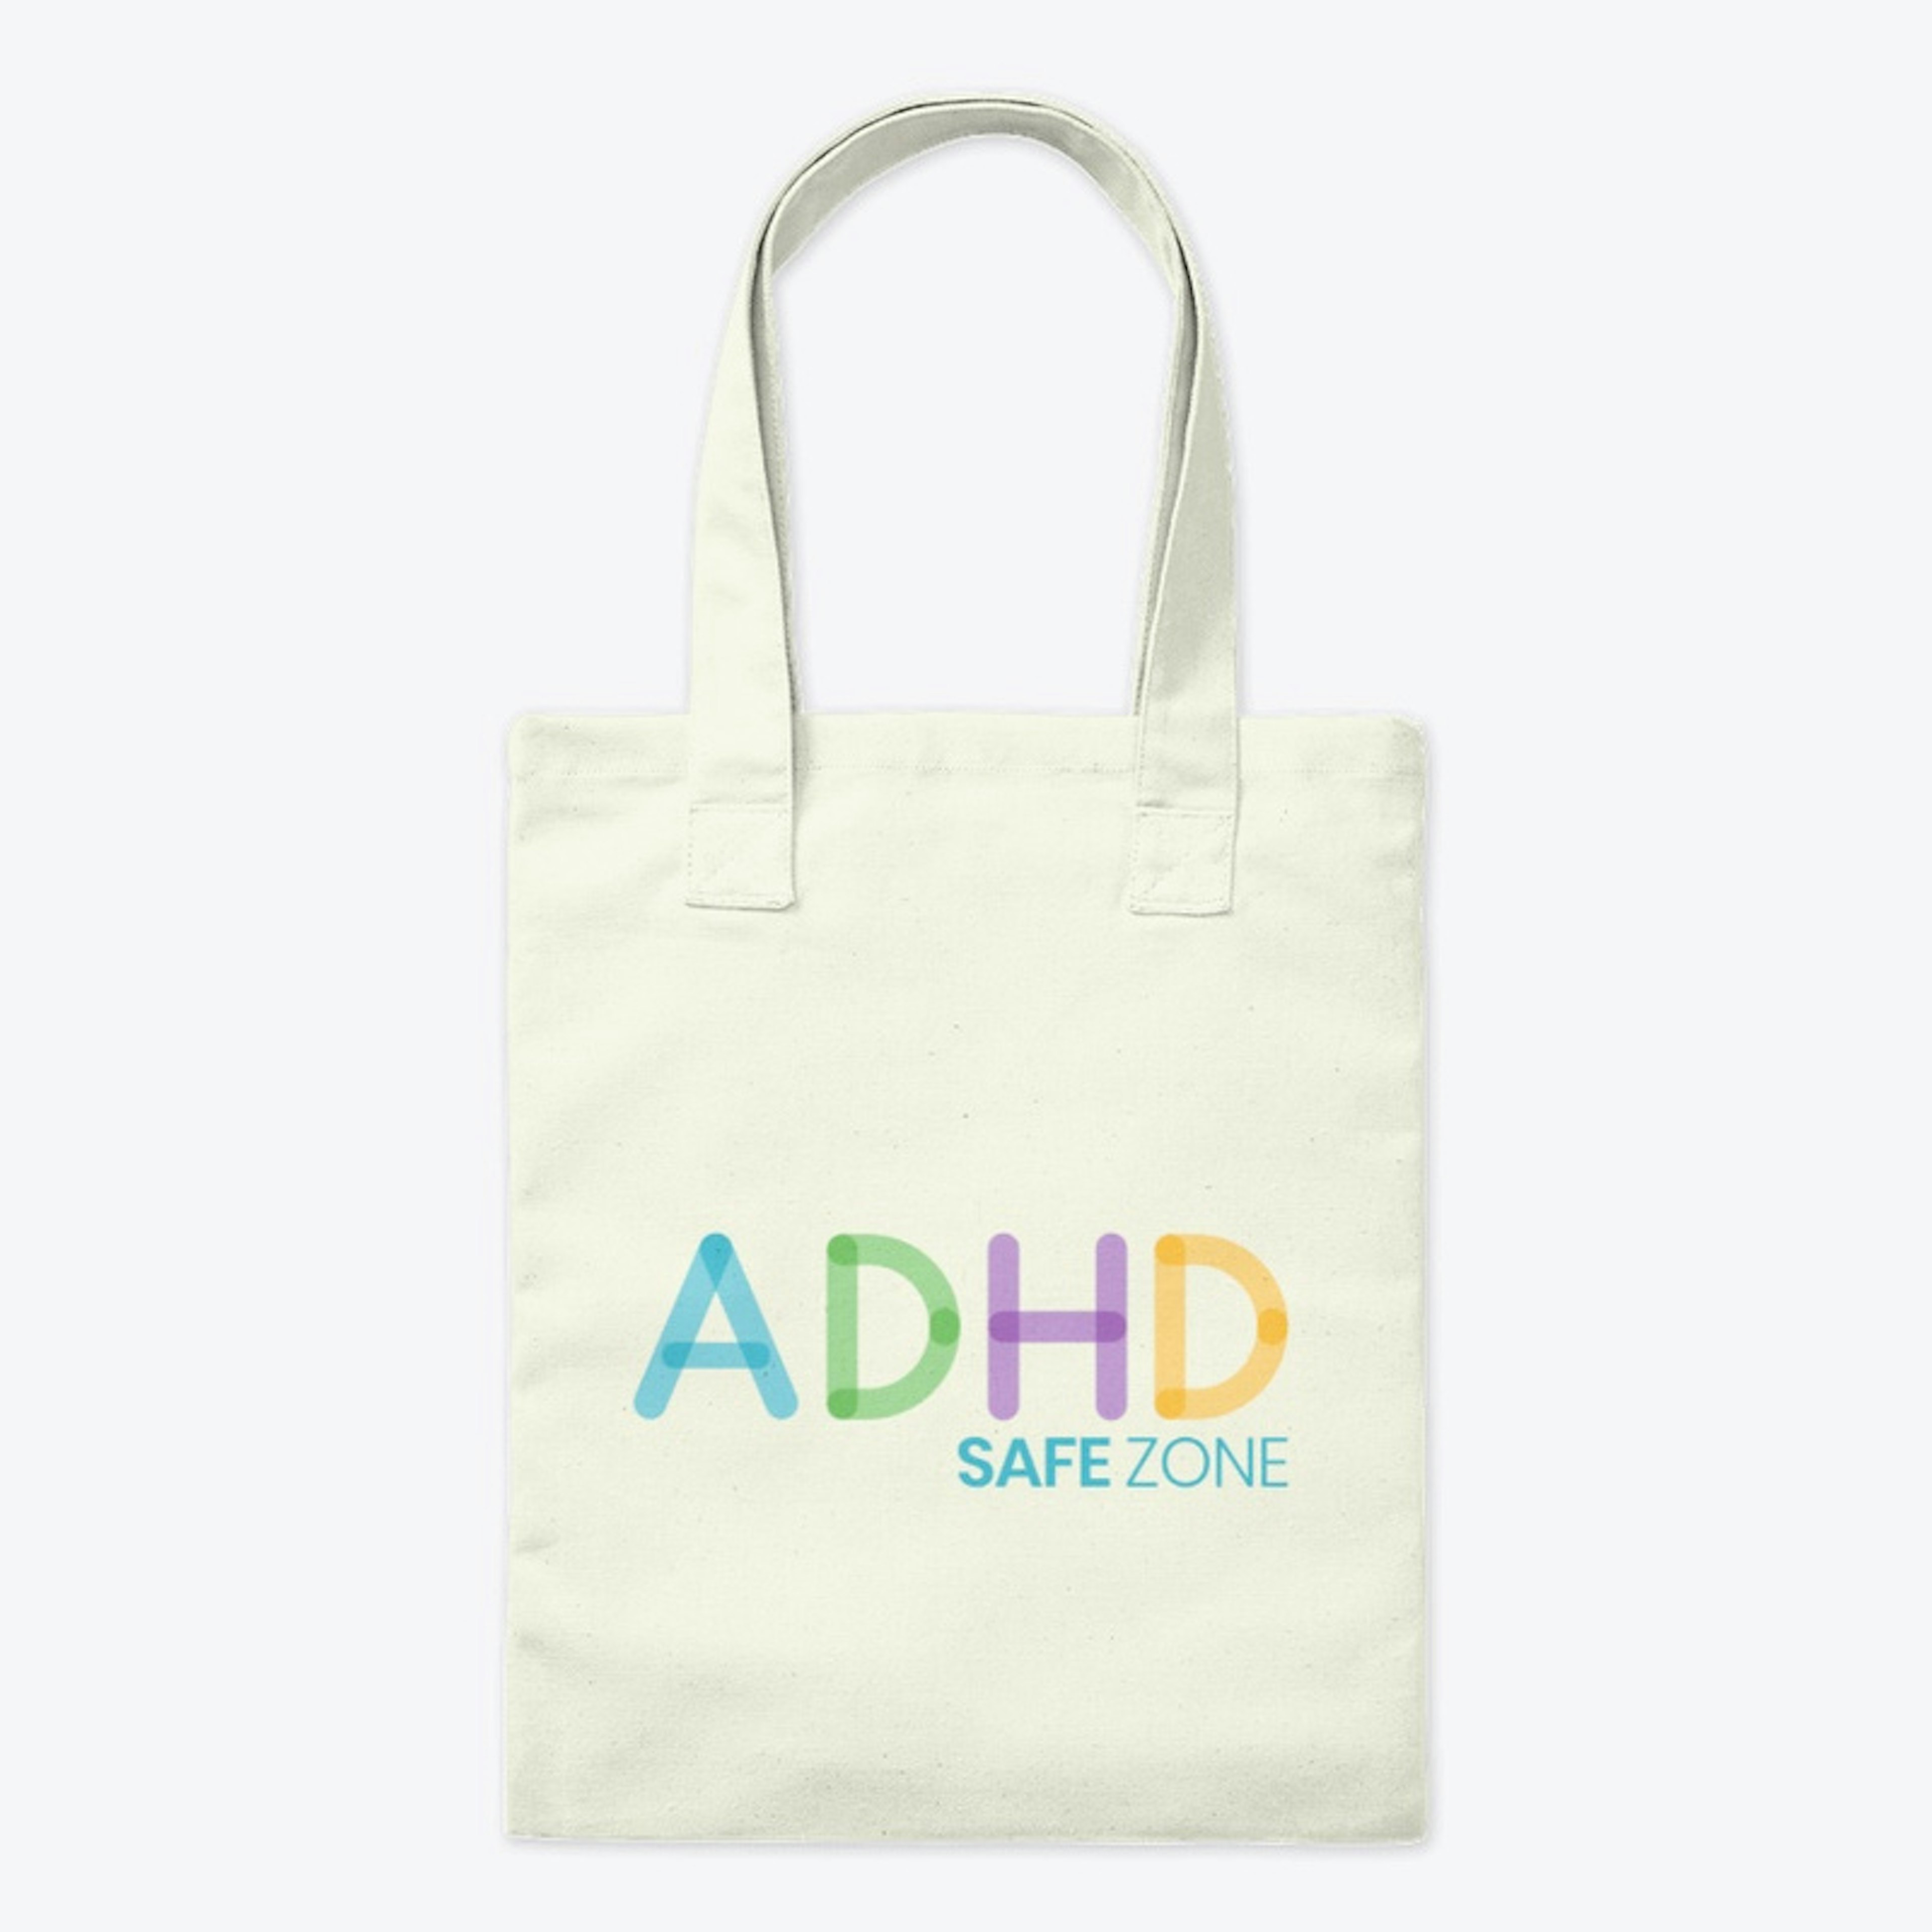 The ADHD Safe Zone